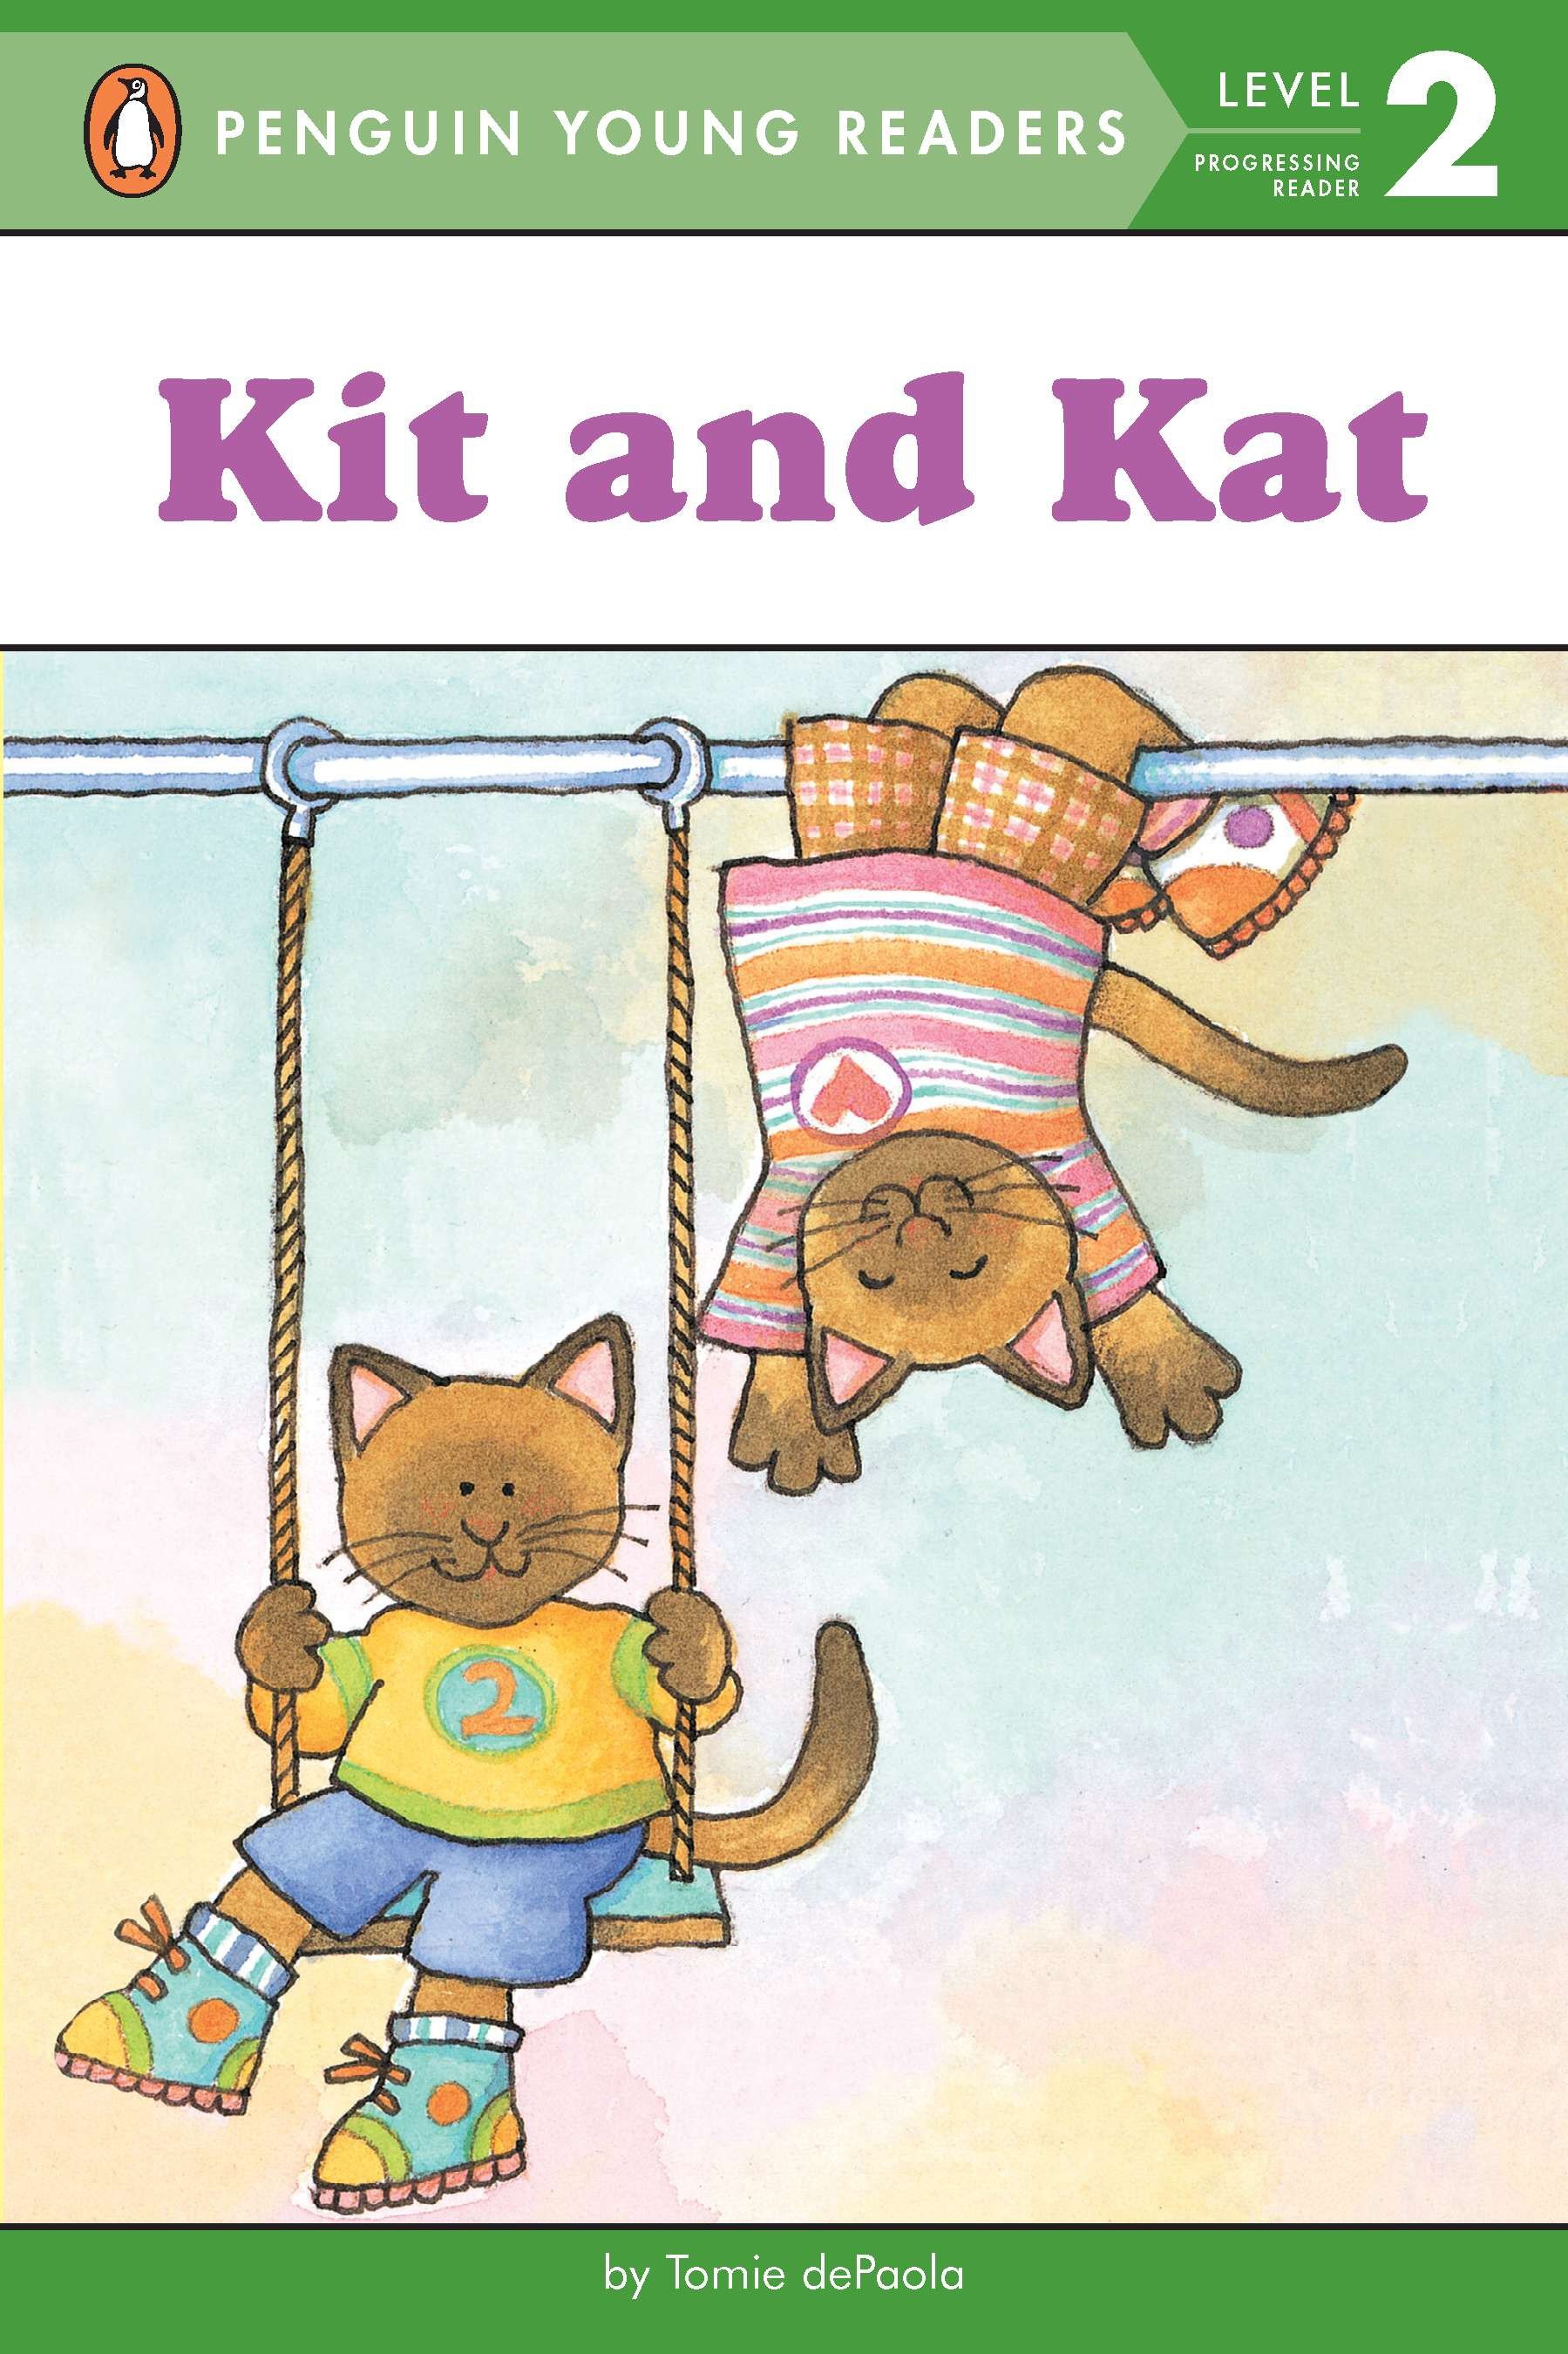 Penguin Young Readers, Level 2 - Kit and Kat | First reader